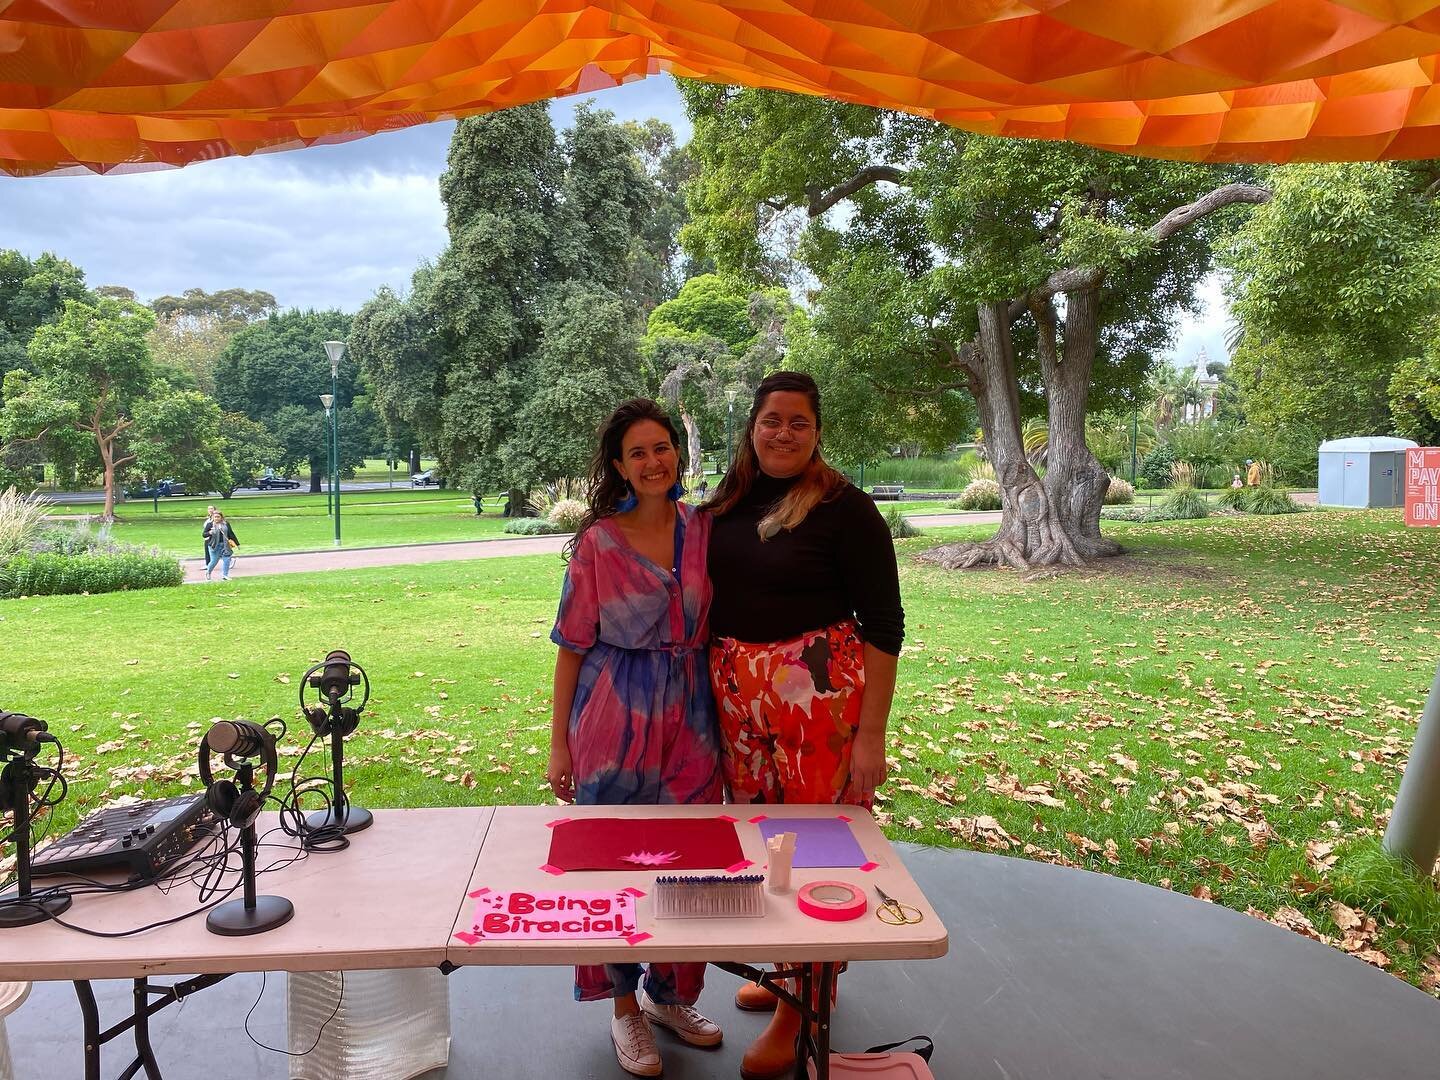 Hosting our craftwork @mpavilion a few weeks ago. We will posting some of the incredible collage creations over the coming weeks.